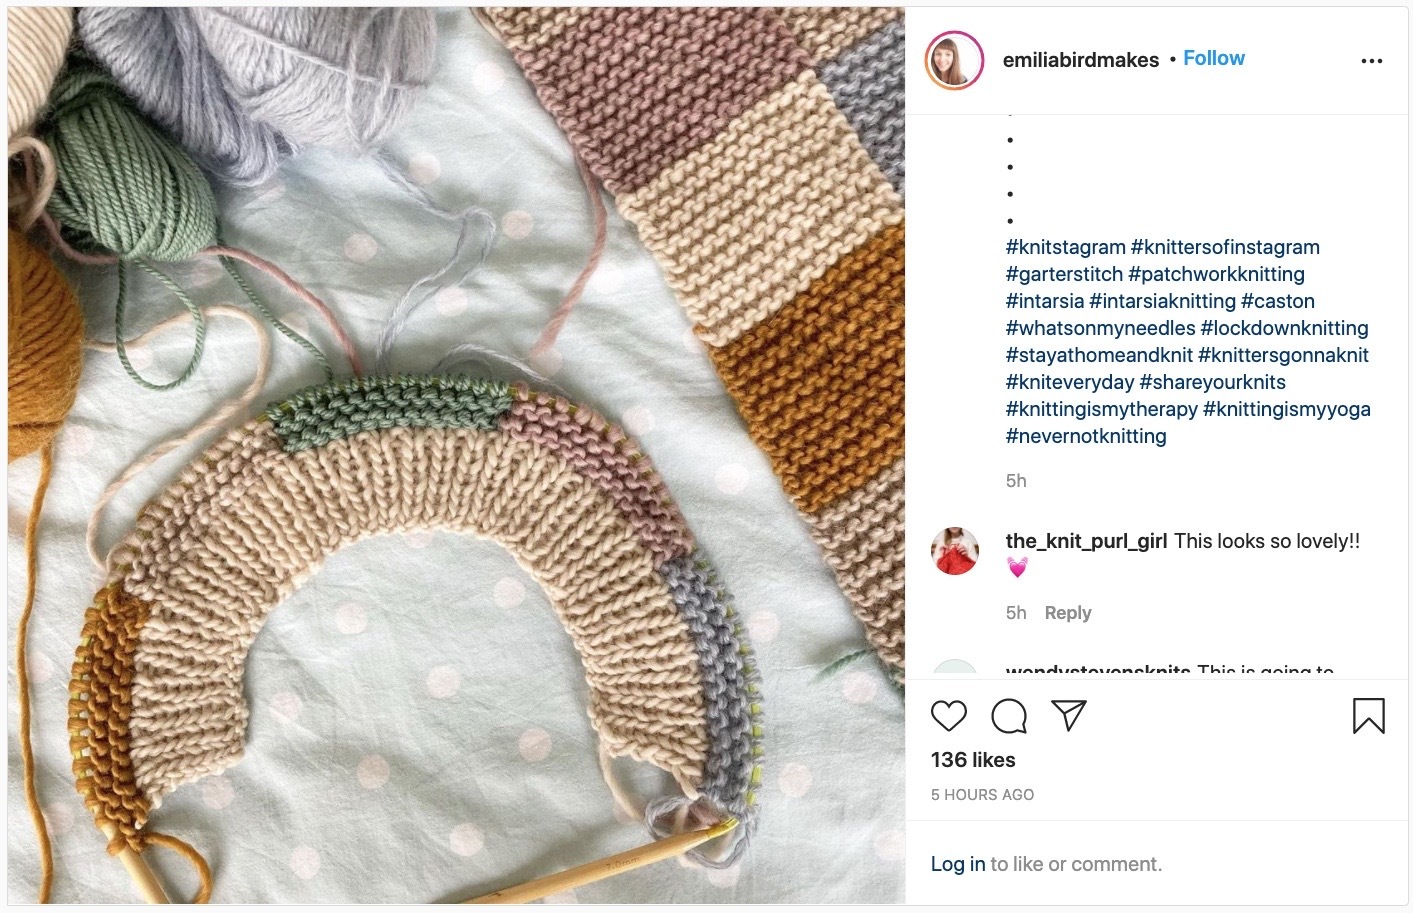 Instagram post with knitted scarf and the instagram hashtag #knittersofinstagram